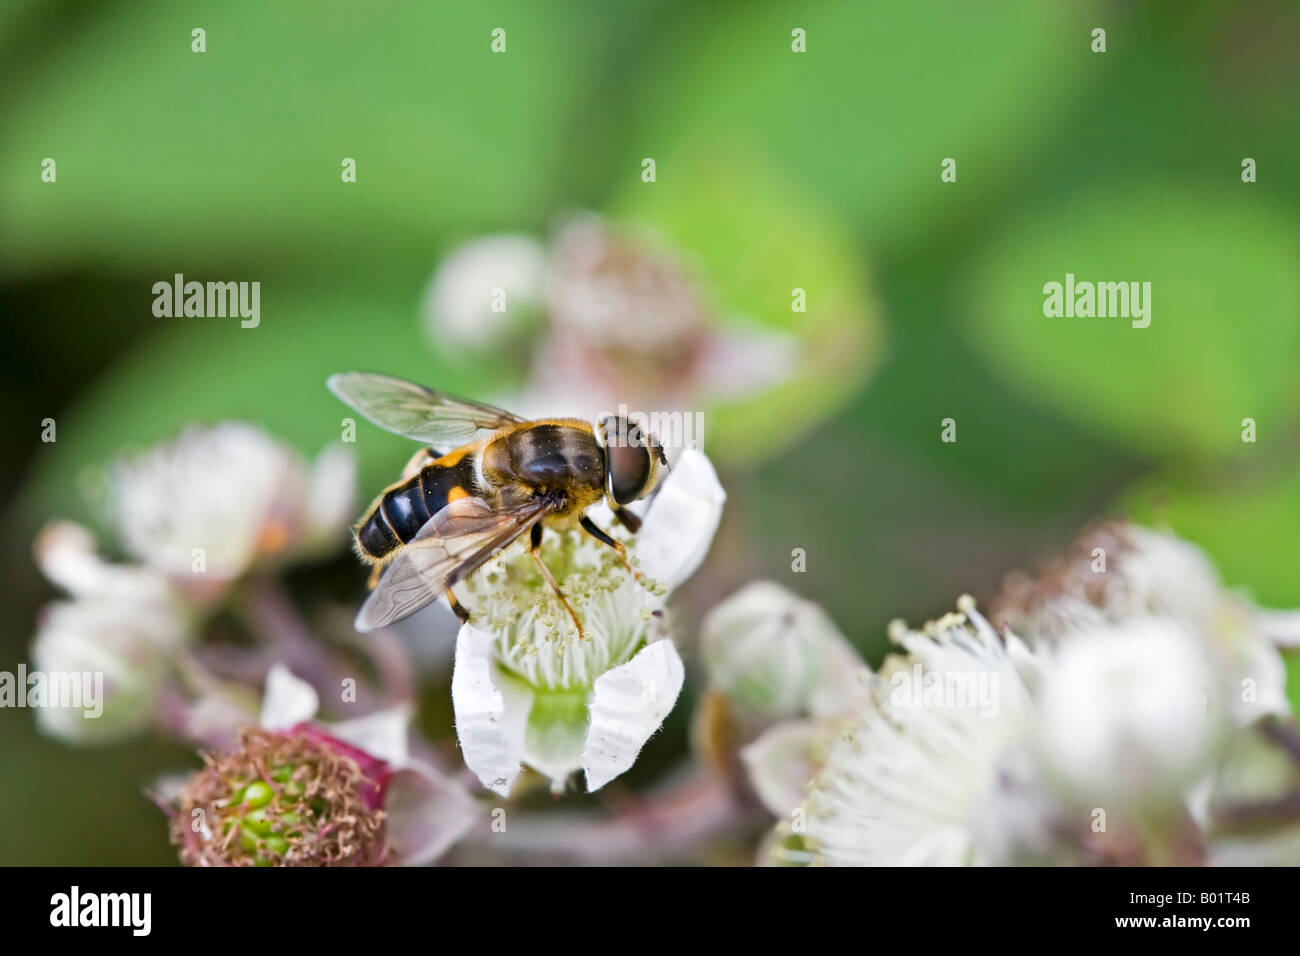 Hoverfly, Syrphid fly, on blackberry blossom Stock Photo